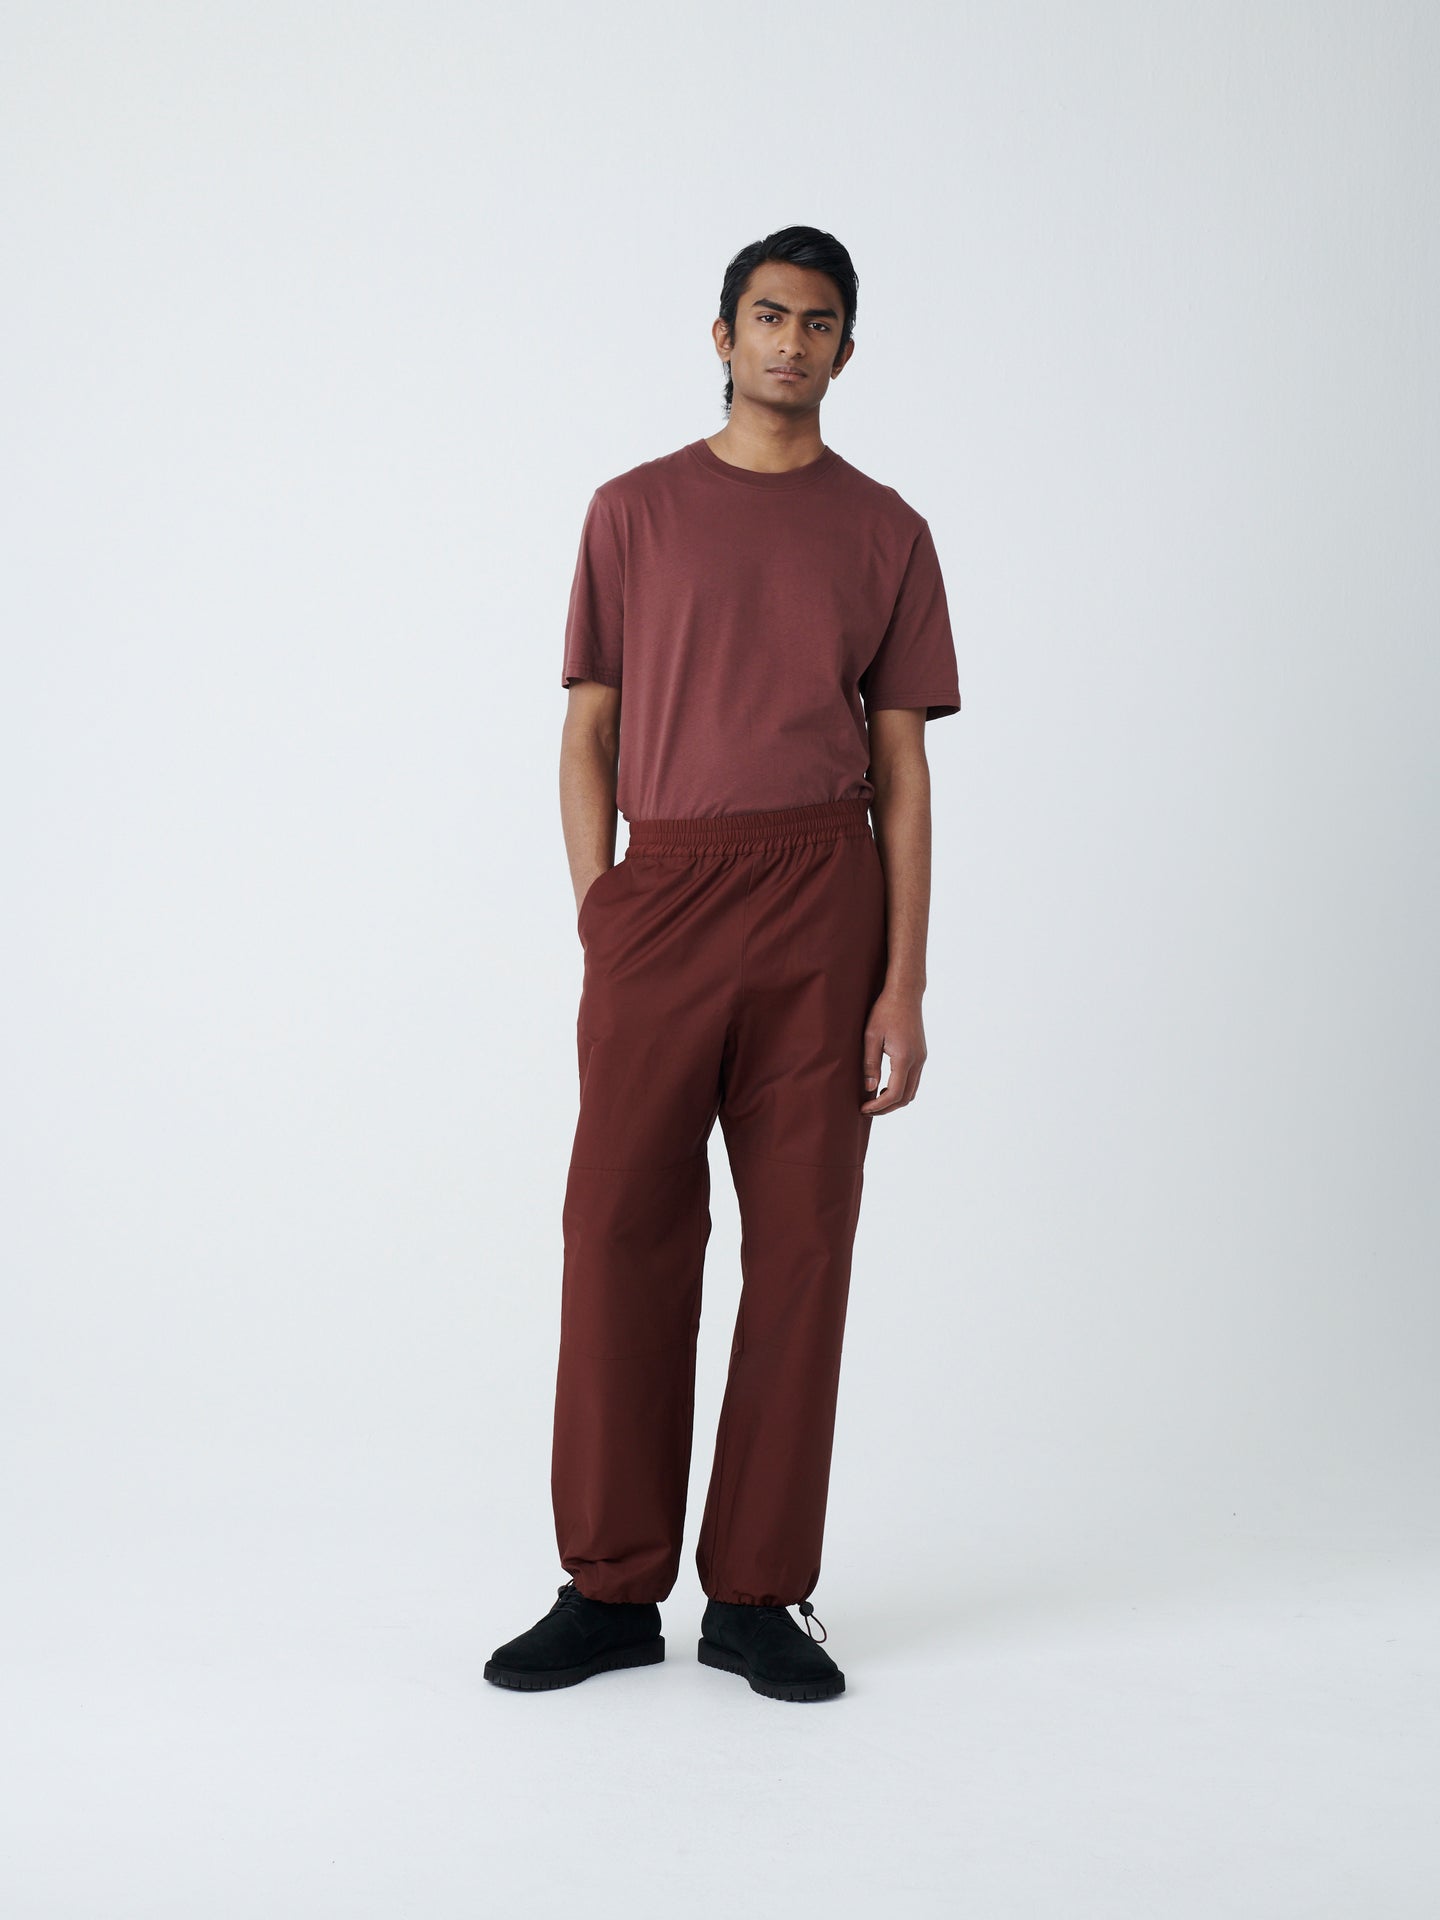 Zephyr Coated Cotton Pant in Chestnut